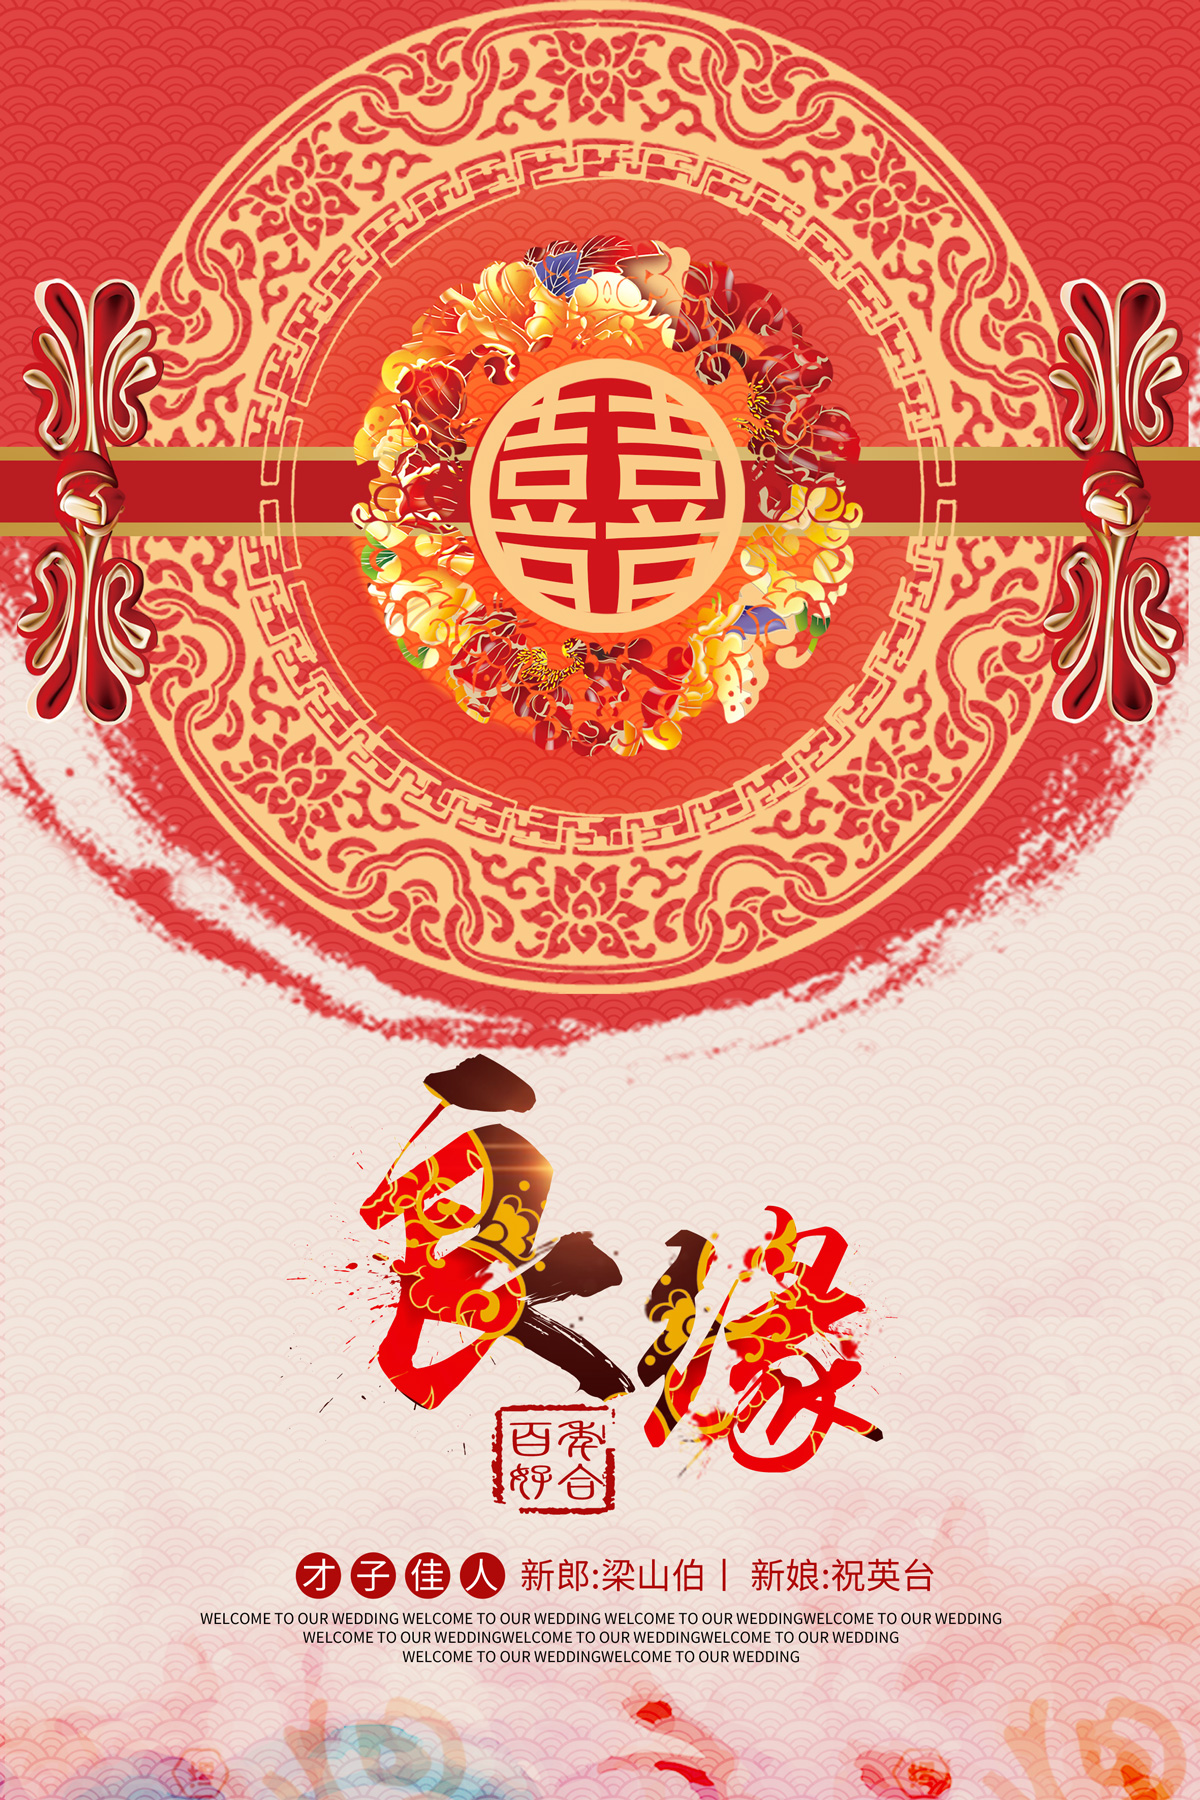 Chinese wedding poster PSD File Free Download